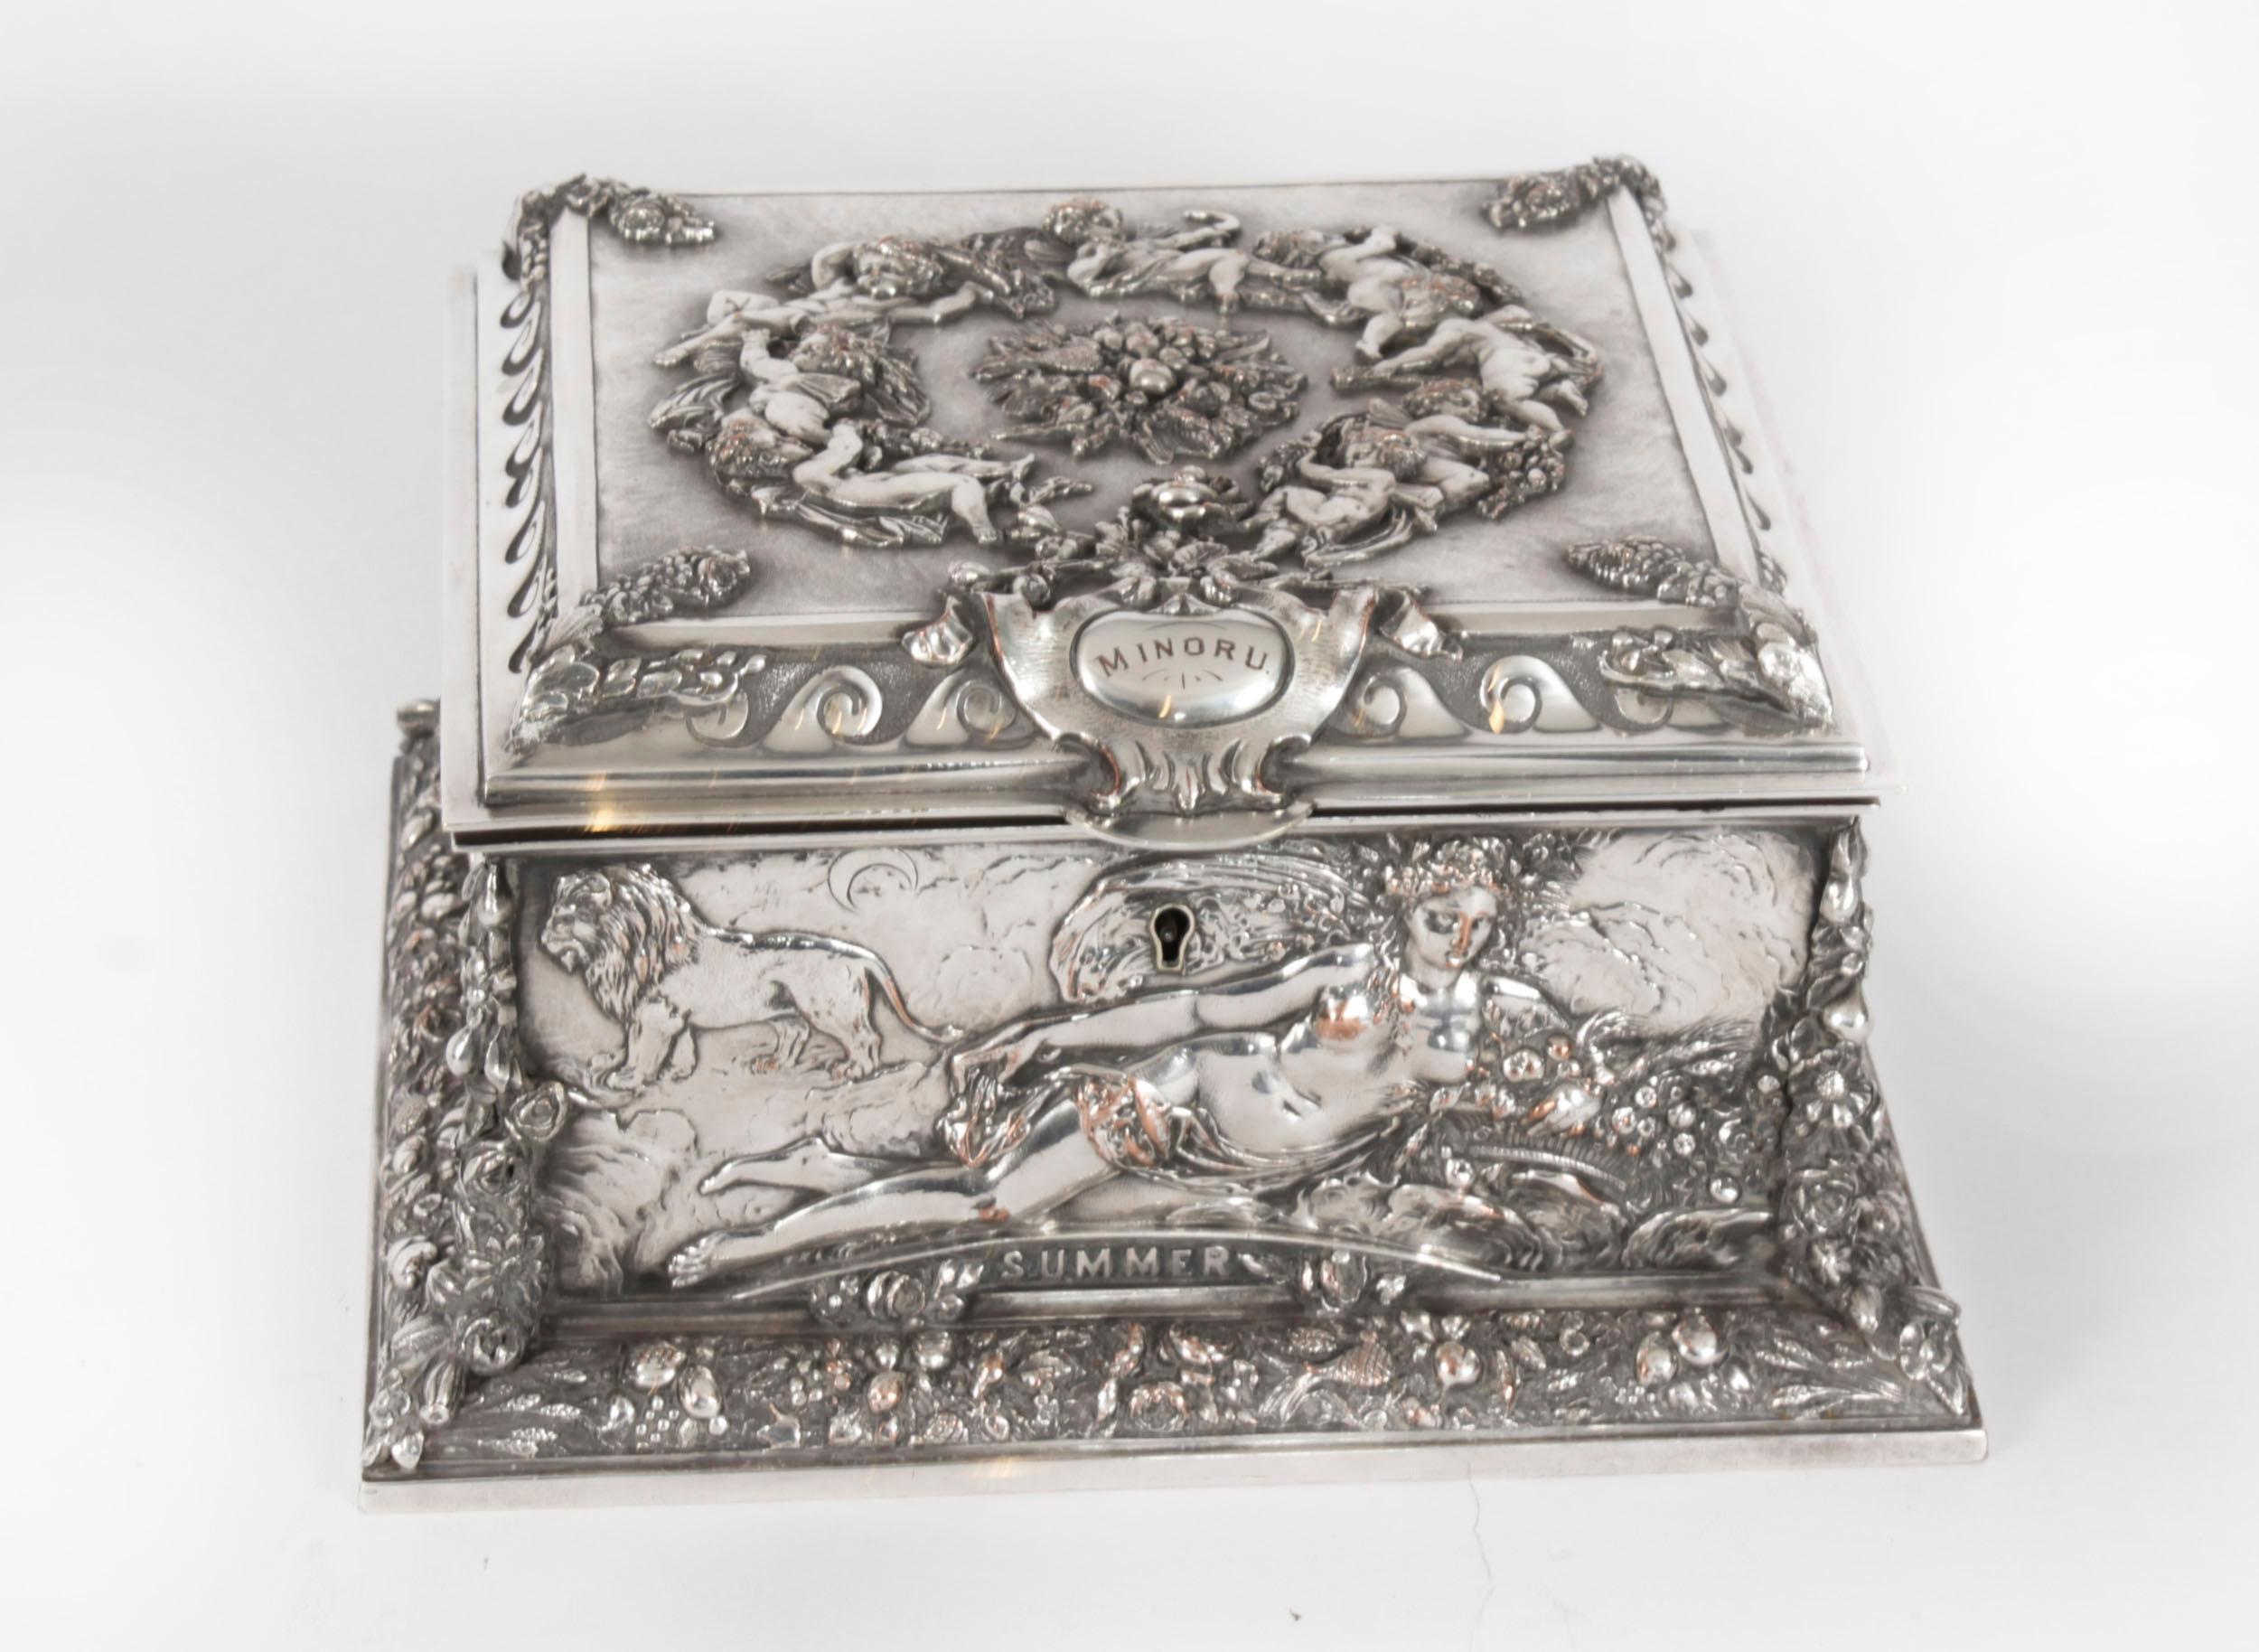 This is a lovely antique Victorian silver plated casket bearing the makers mark of the renowned silversmiths, Walker and Hall, Circa 1840 in date.

The square casket freatures an epic mythological scene of the four seasons with eight winged cherubs